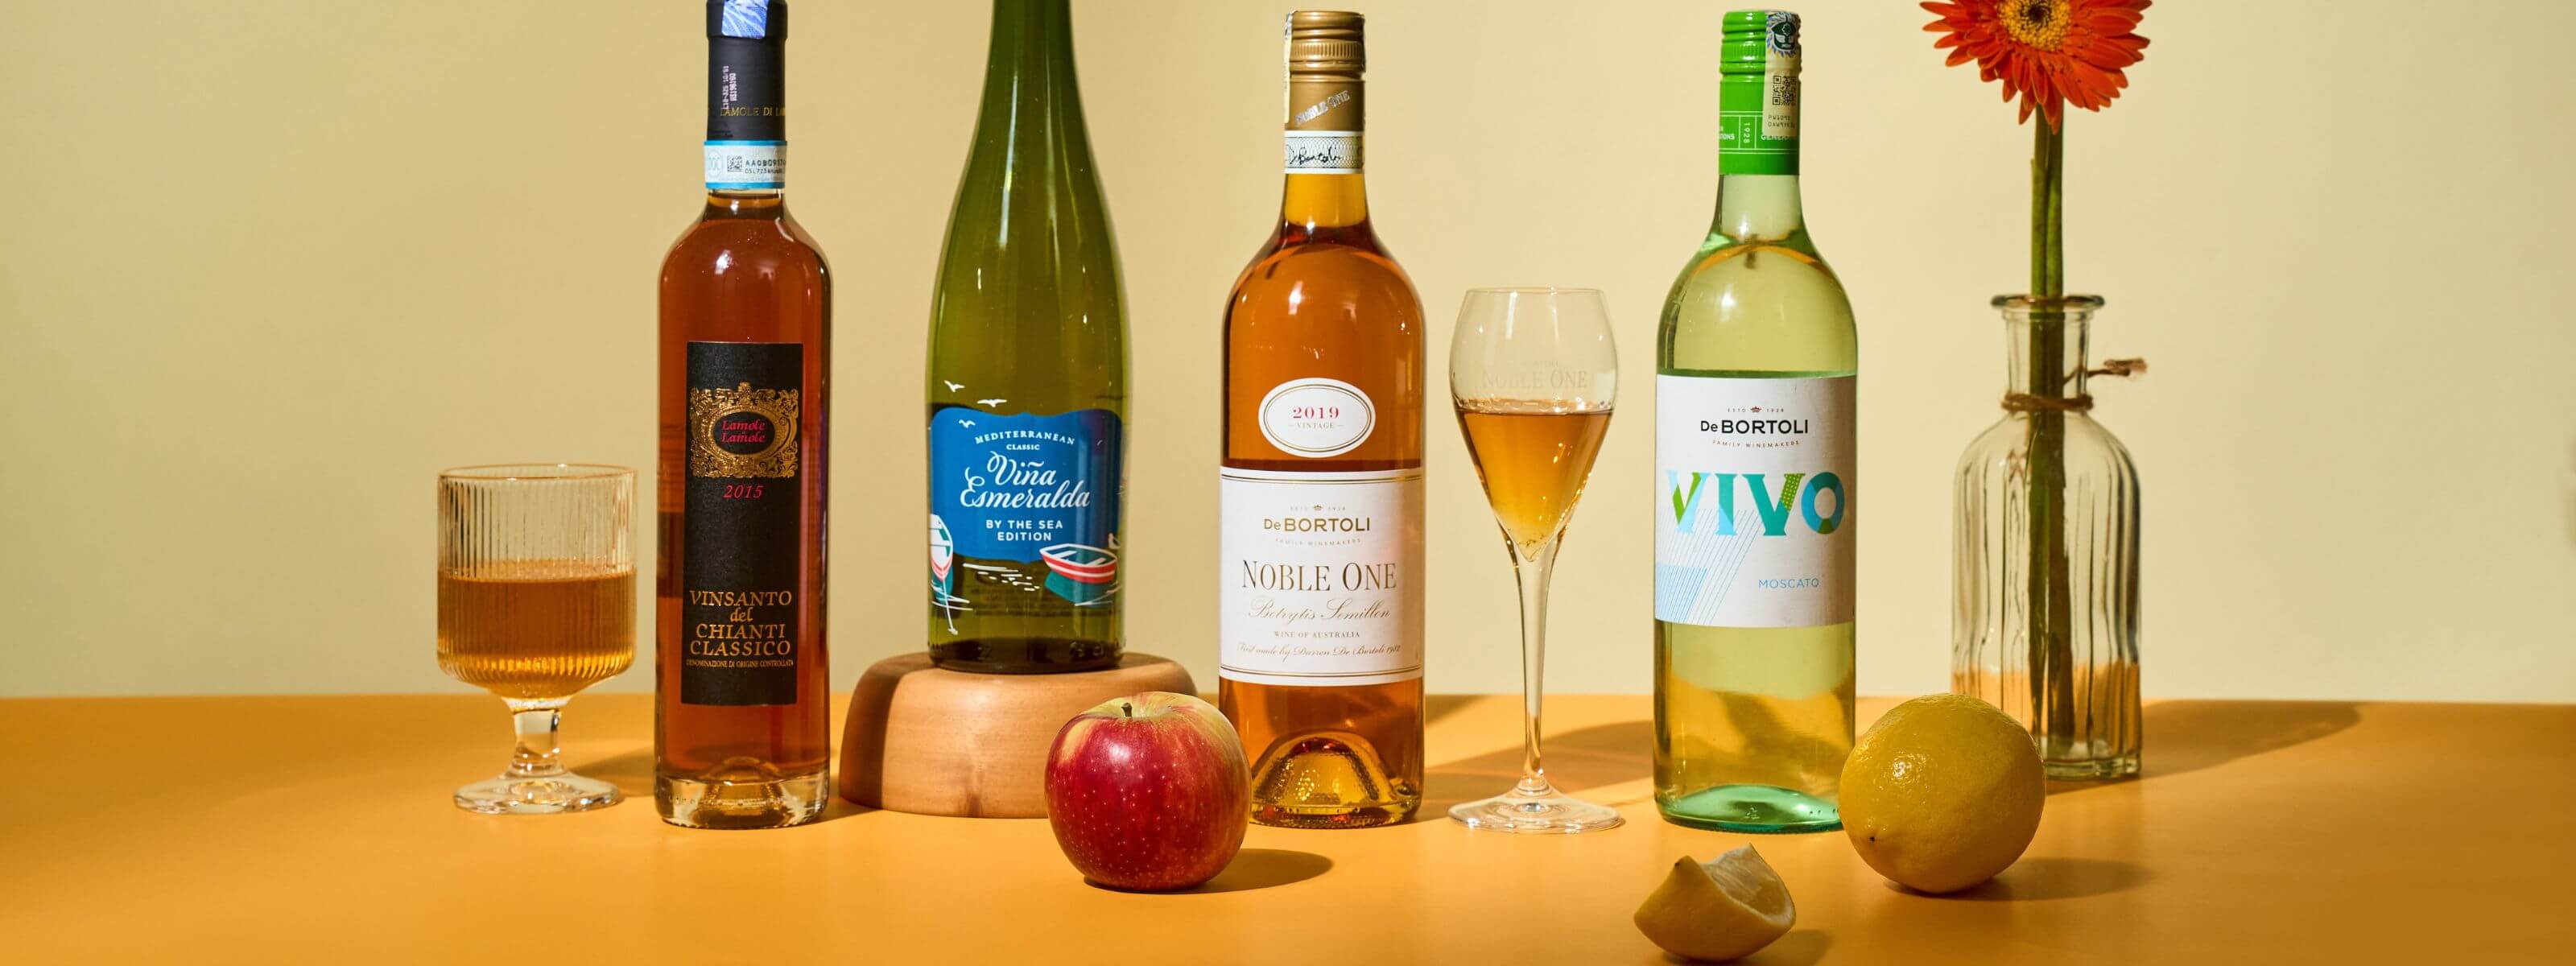 Our selection of dessert wines and sweet wines, including Sauternes, Riesling, Moscato, and more.